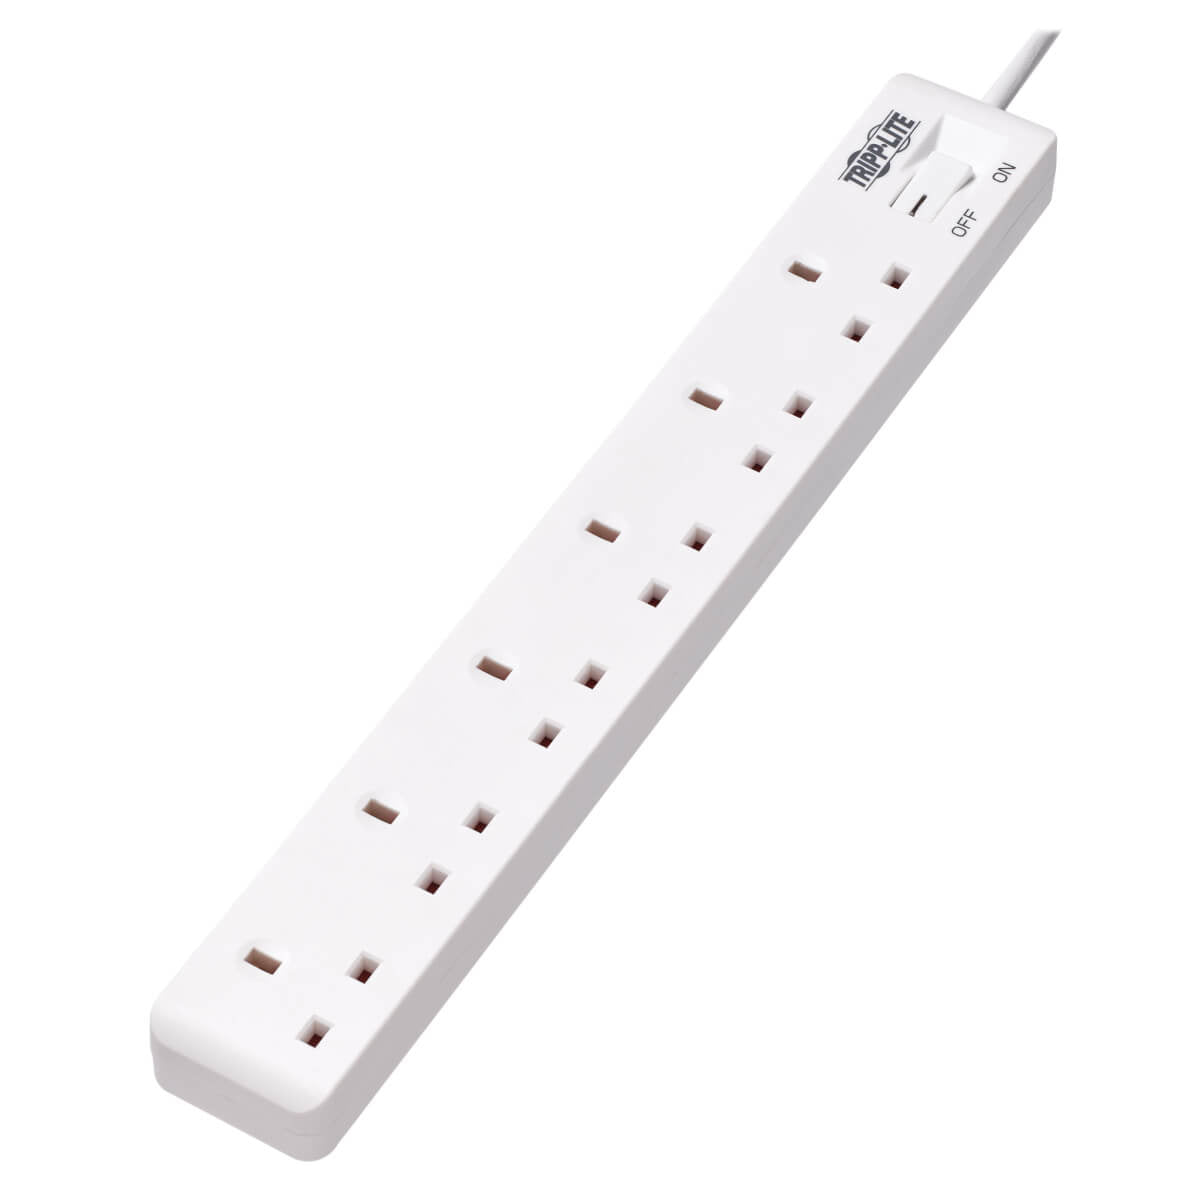 PS6B18 6-Outlet Power Strip - British BS1363A Outlets